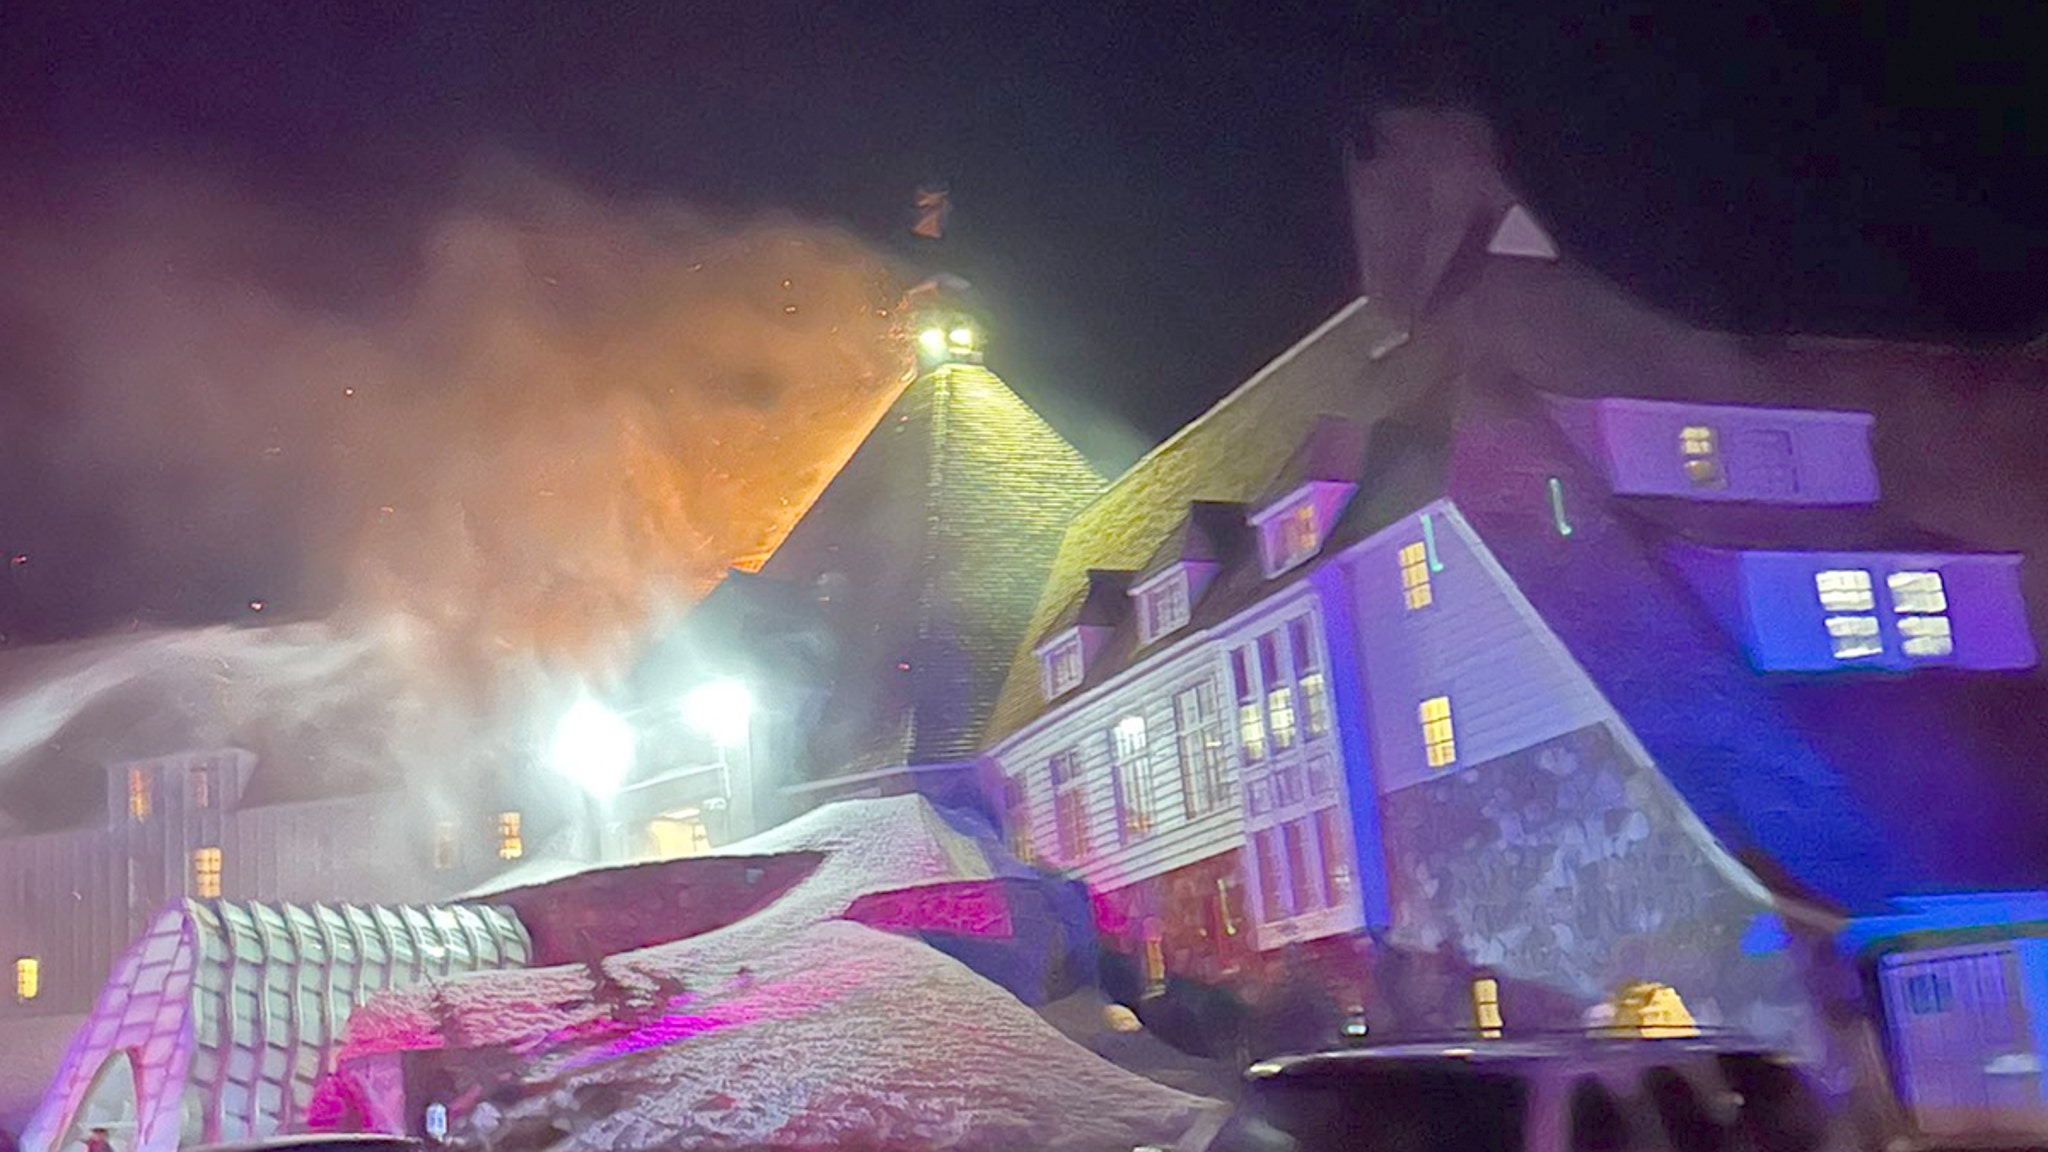 Famous Hotel in Stanley Kubrick's 'The Shining' Goes Up in Flames